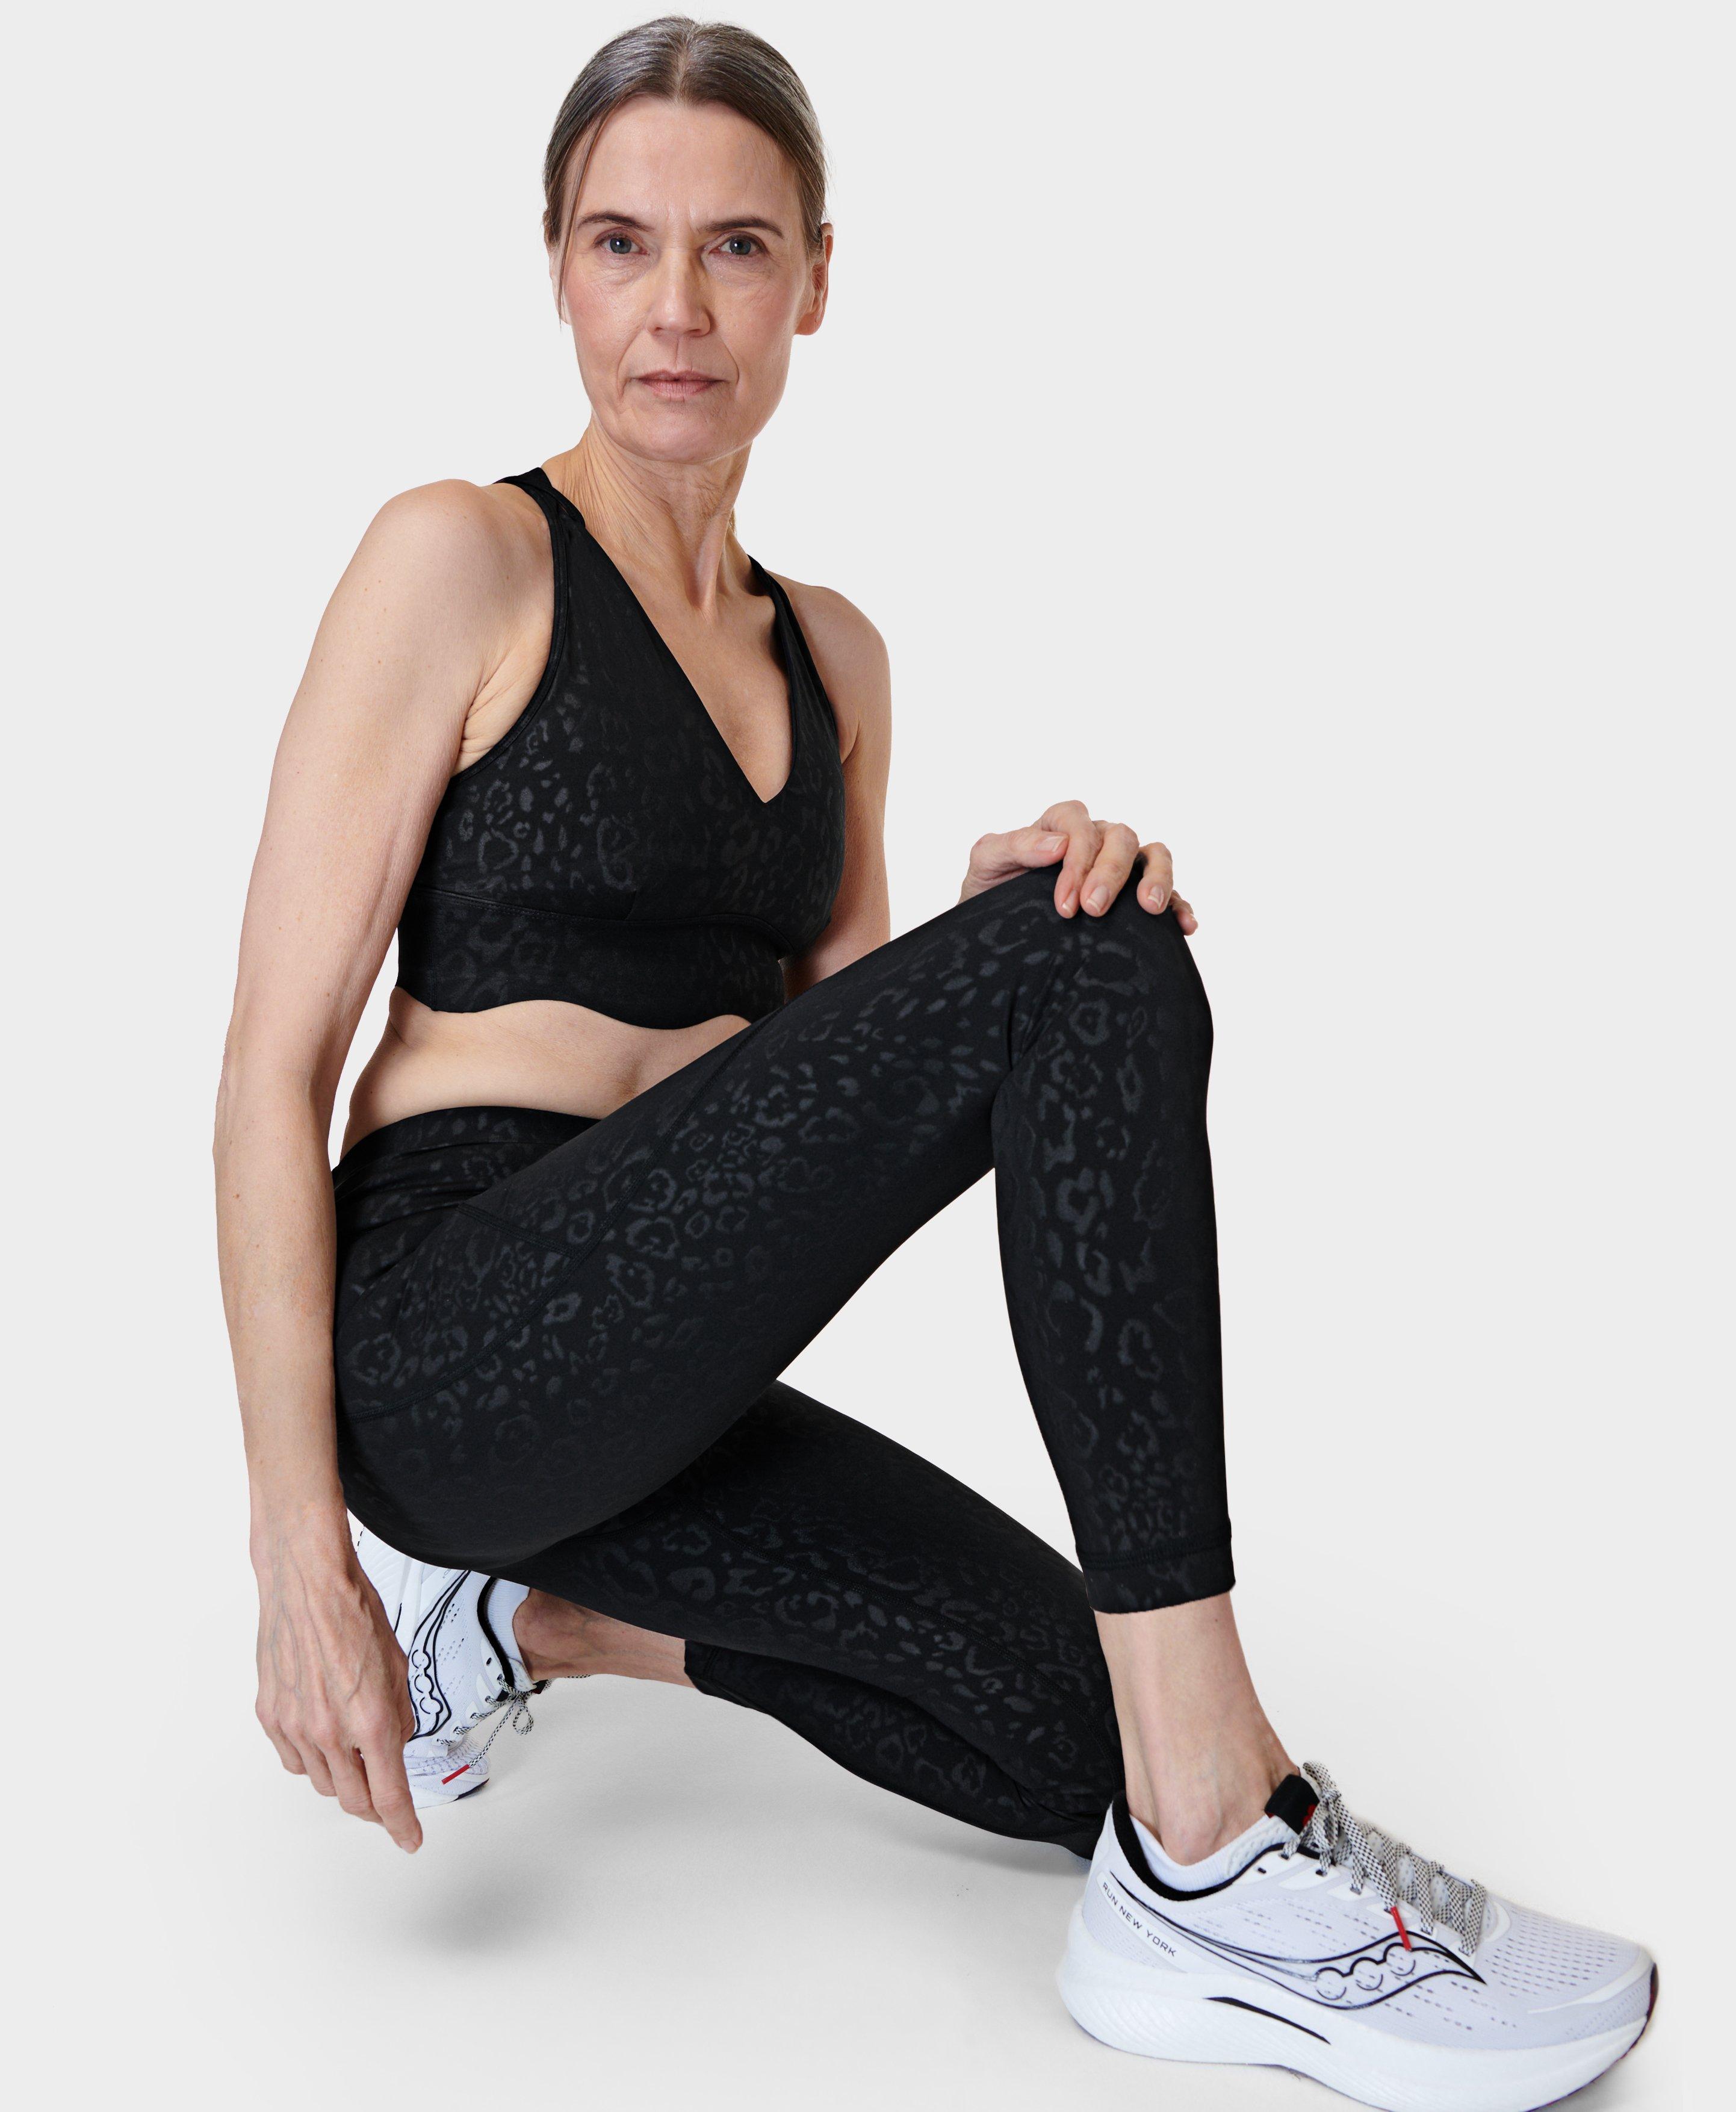 Leopard Print Oblique Shoulder Sport Set With Strap Womens Leopard Print  Gym Leggings For Fitness And Workout In 2021 From Jasperwu, $33.71